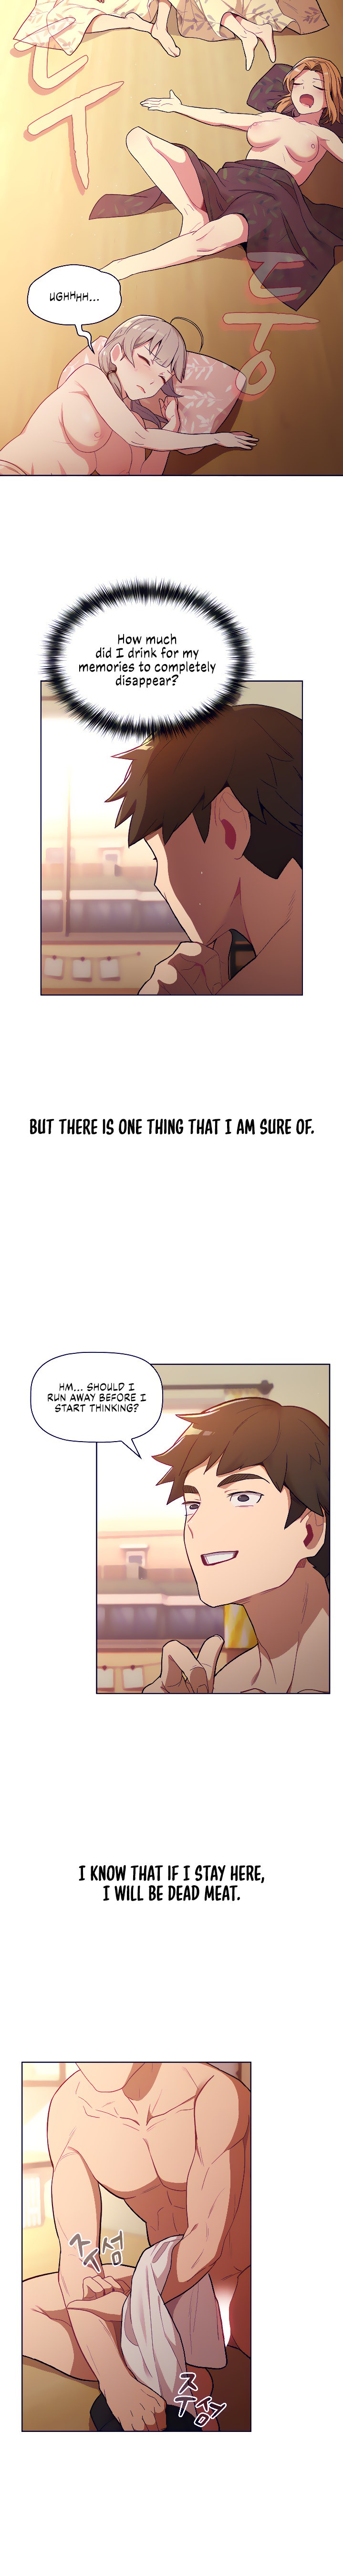 What Do I Do Now? - Chapter 1 Page 15